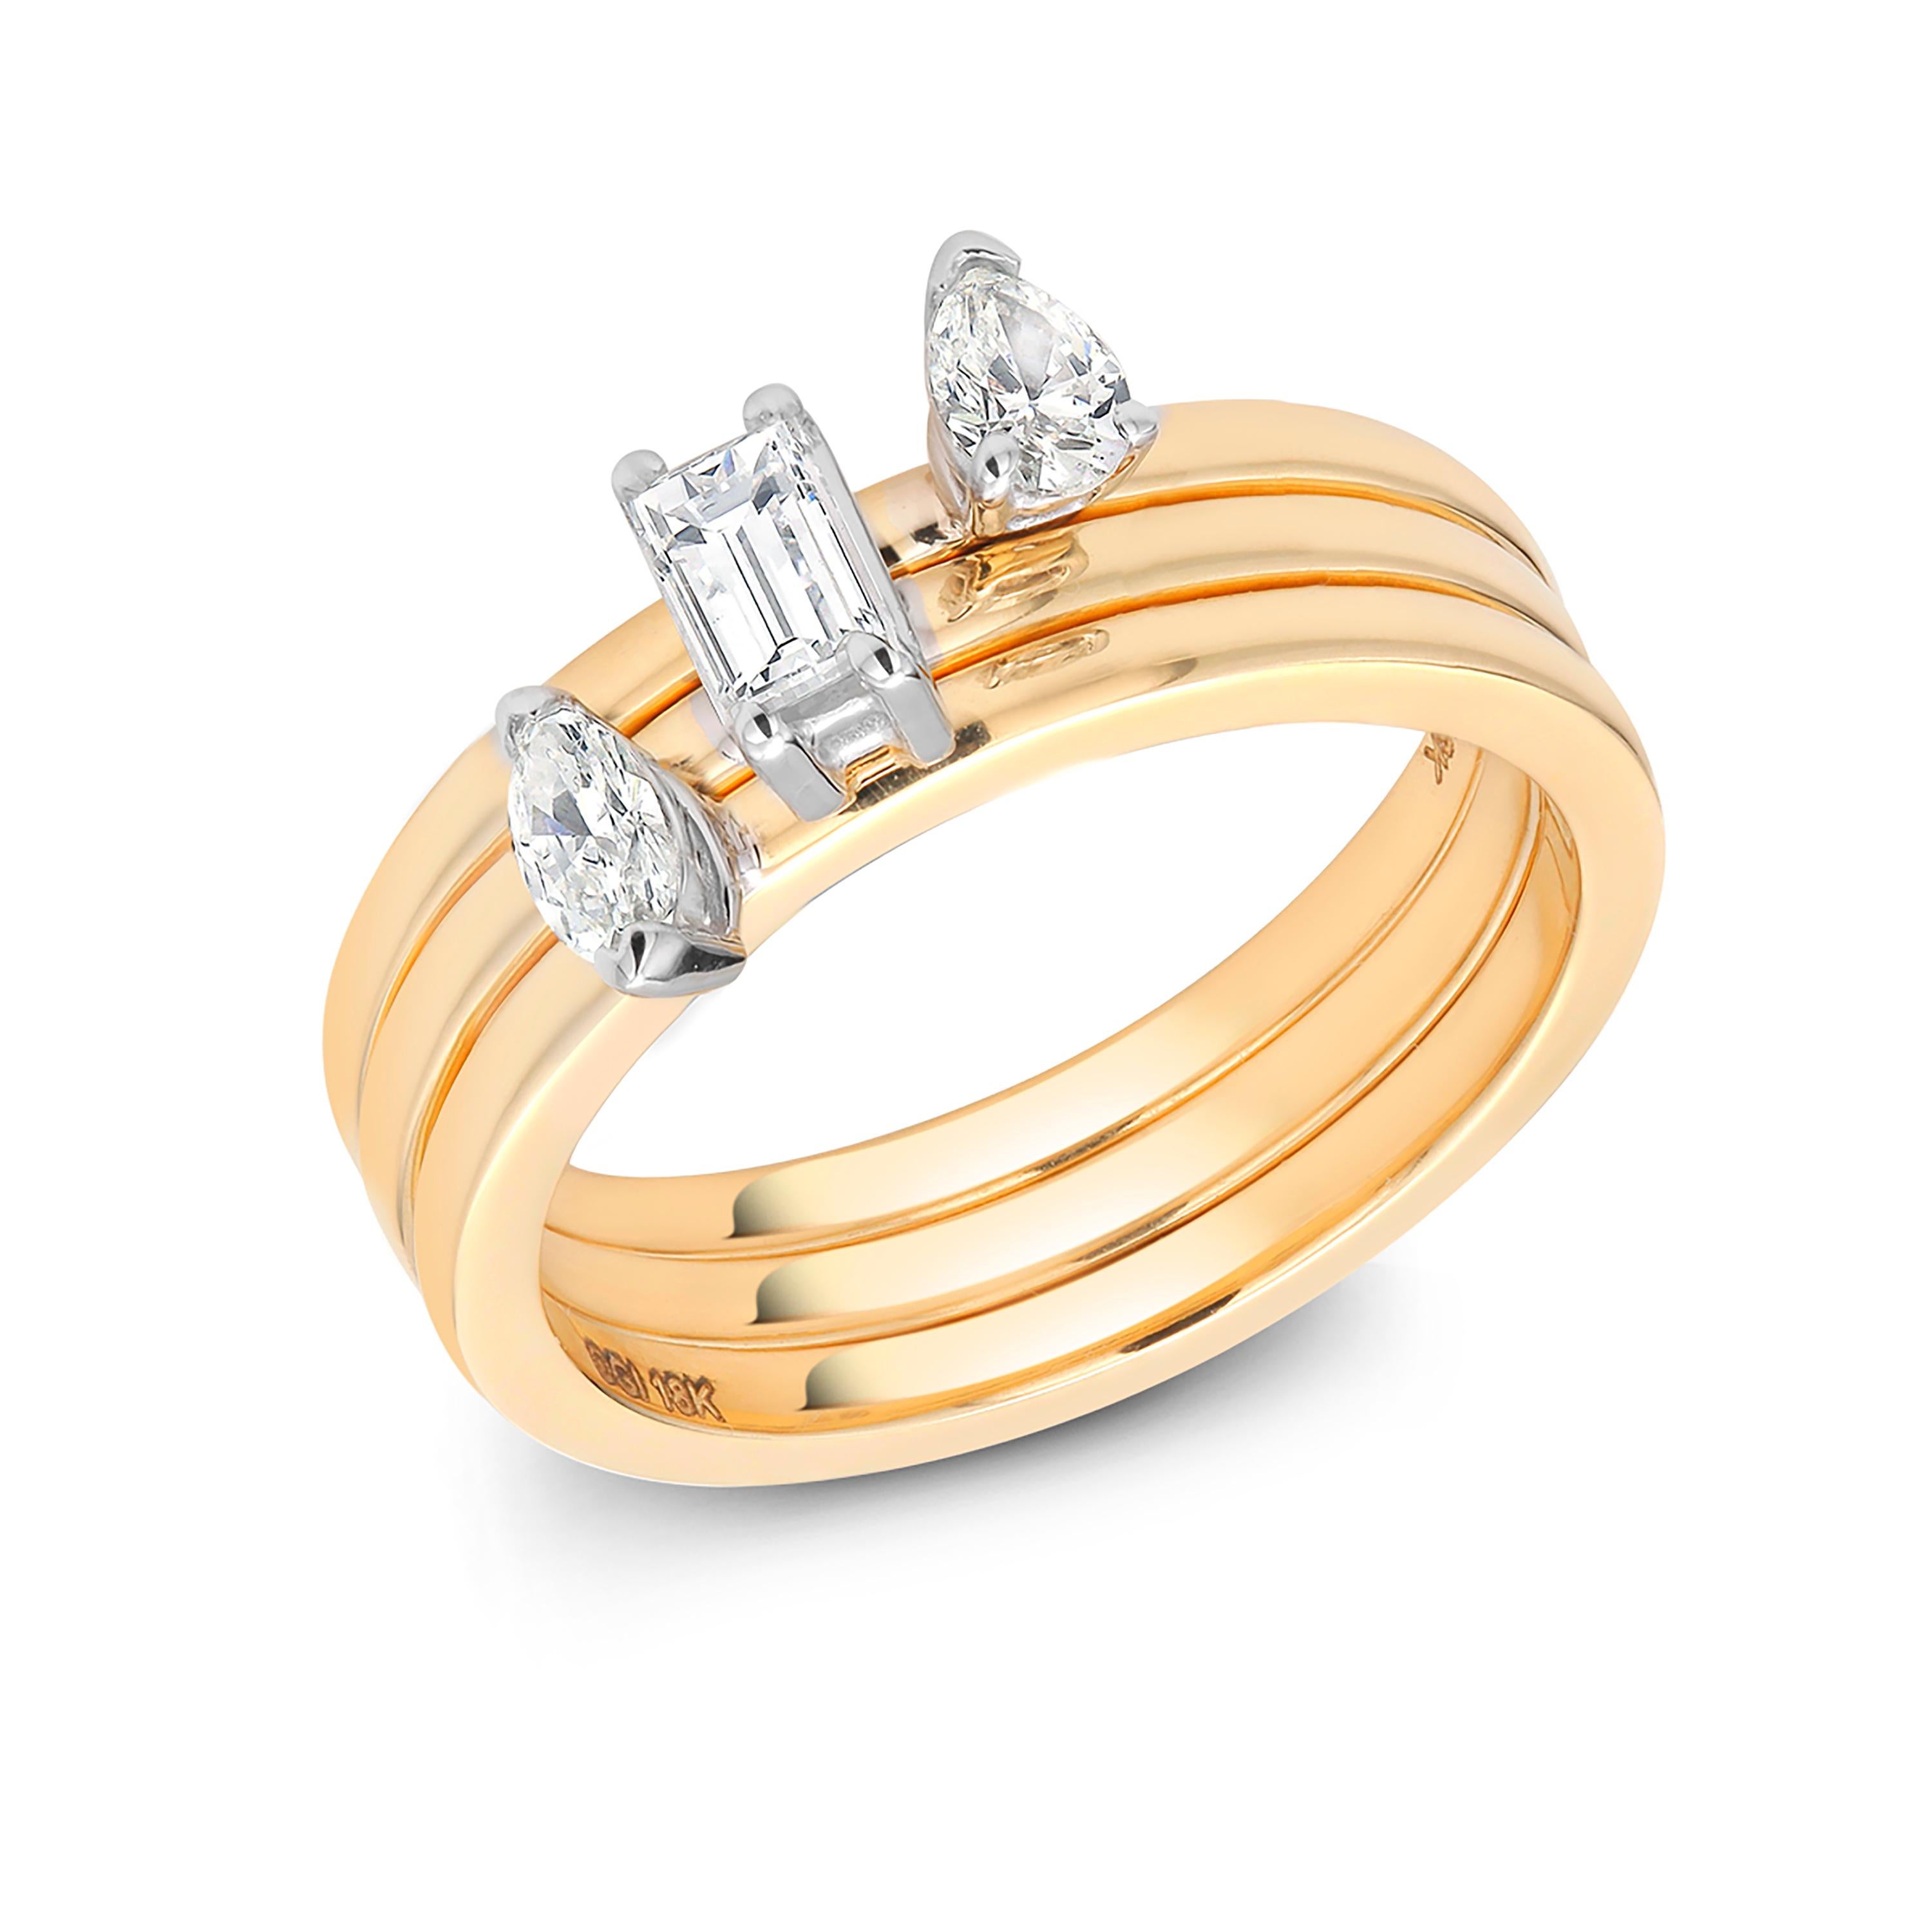 Three-Diamond Yellow Gold Stacking Bands Sold as a Set 1